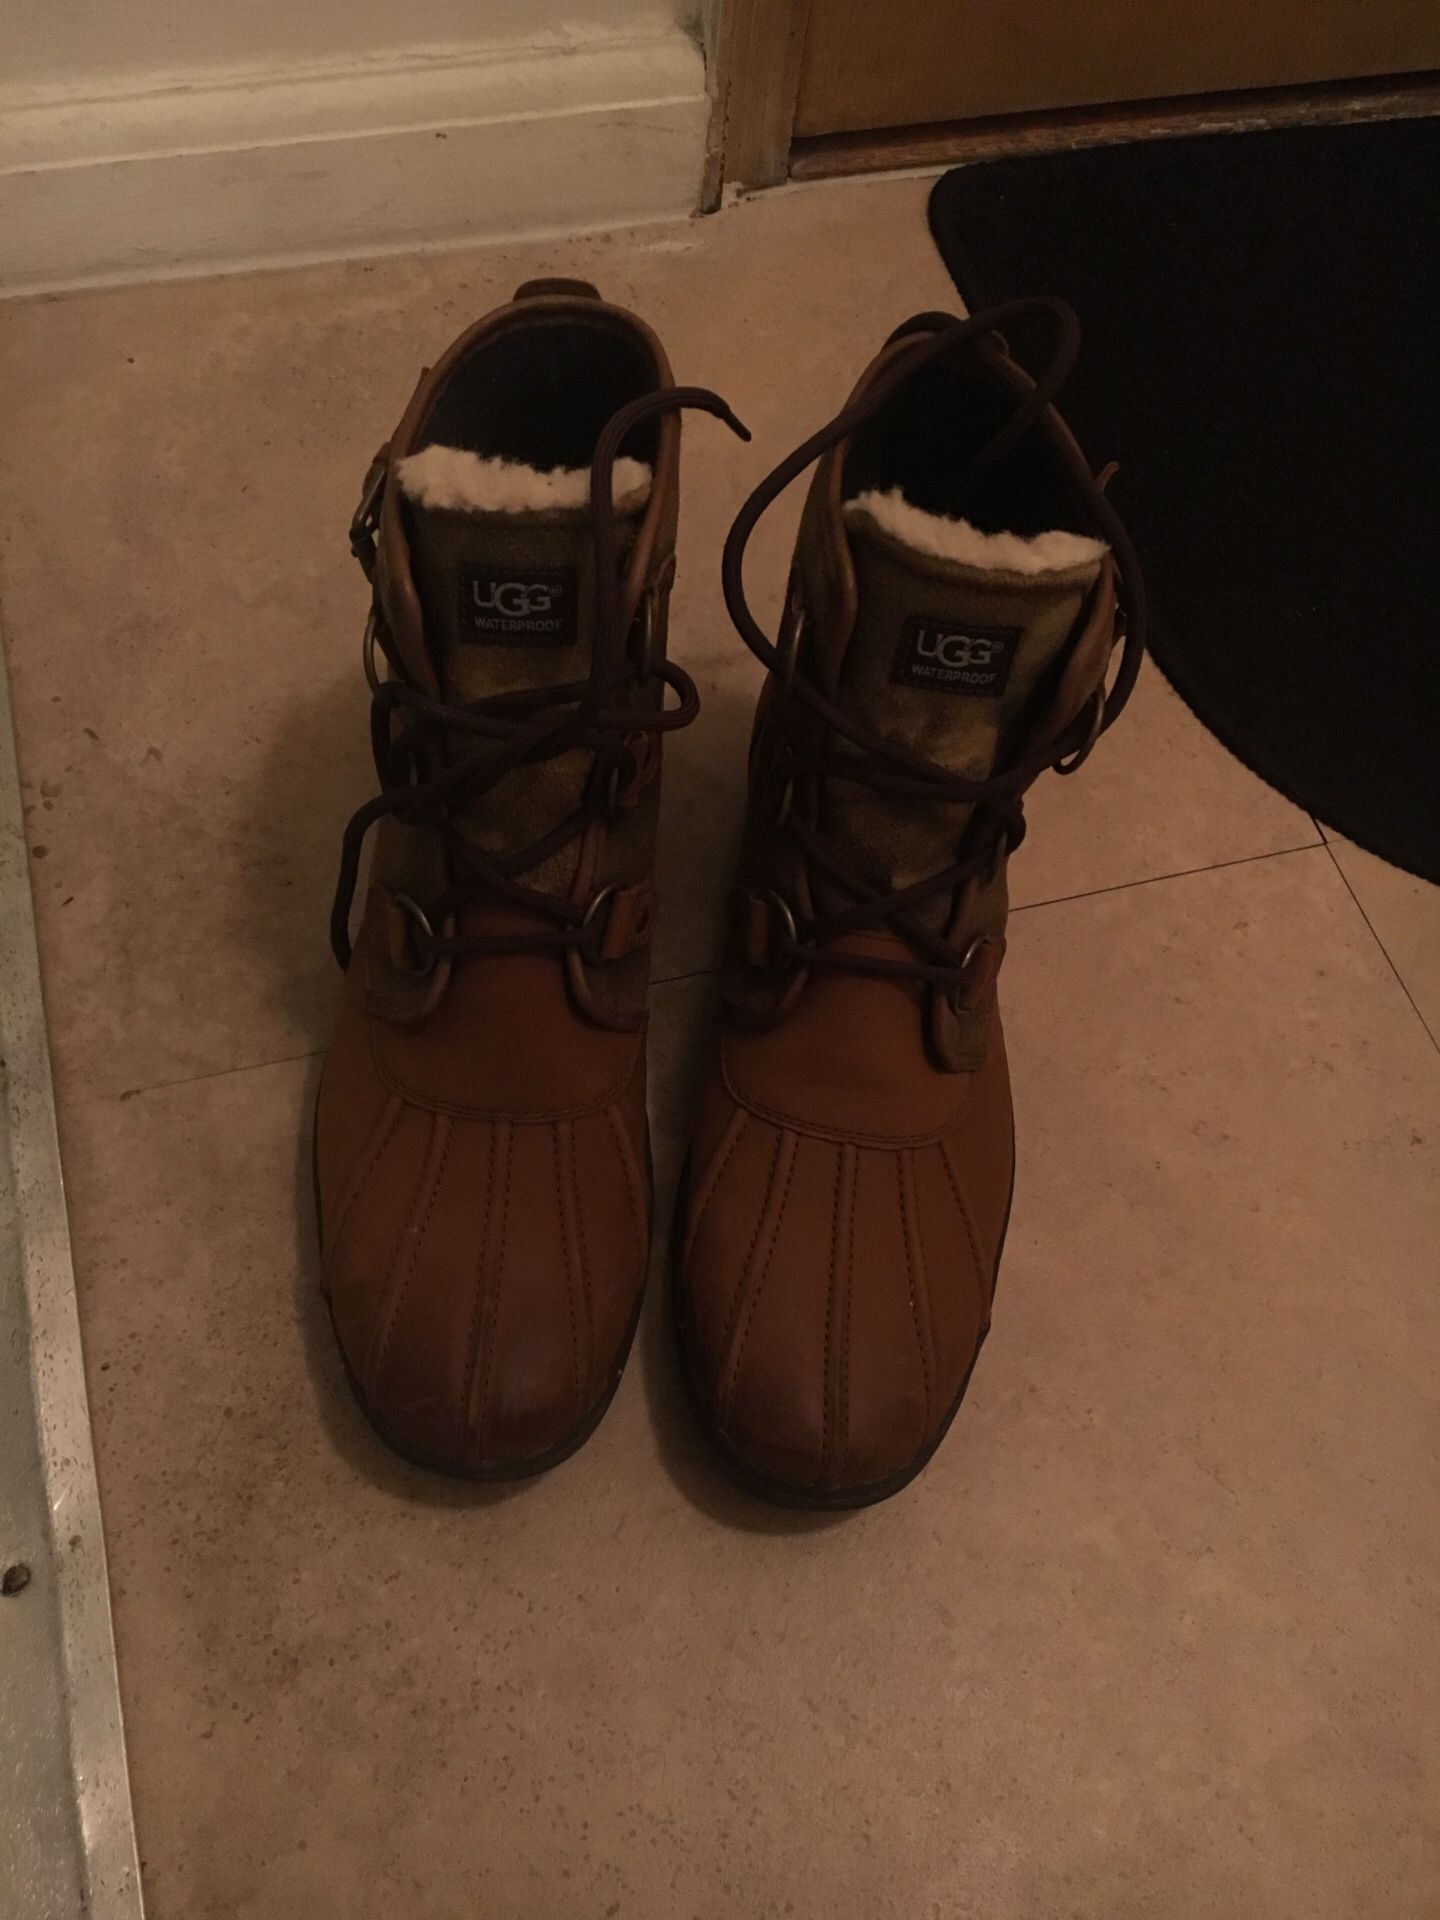 Women’s UGG Boots size 11